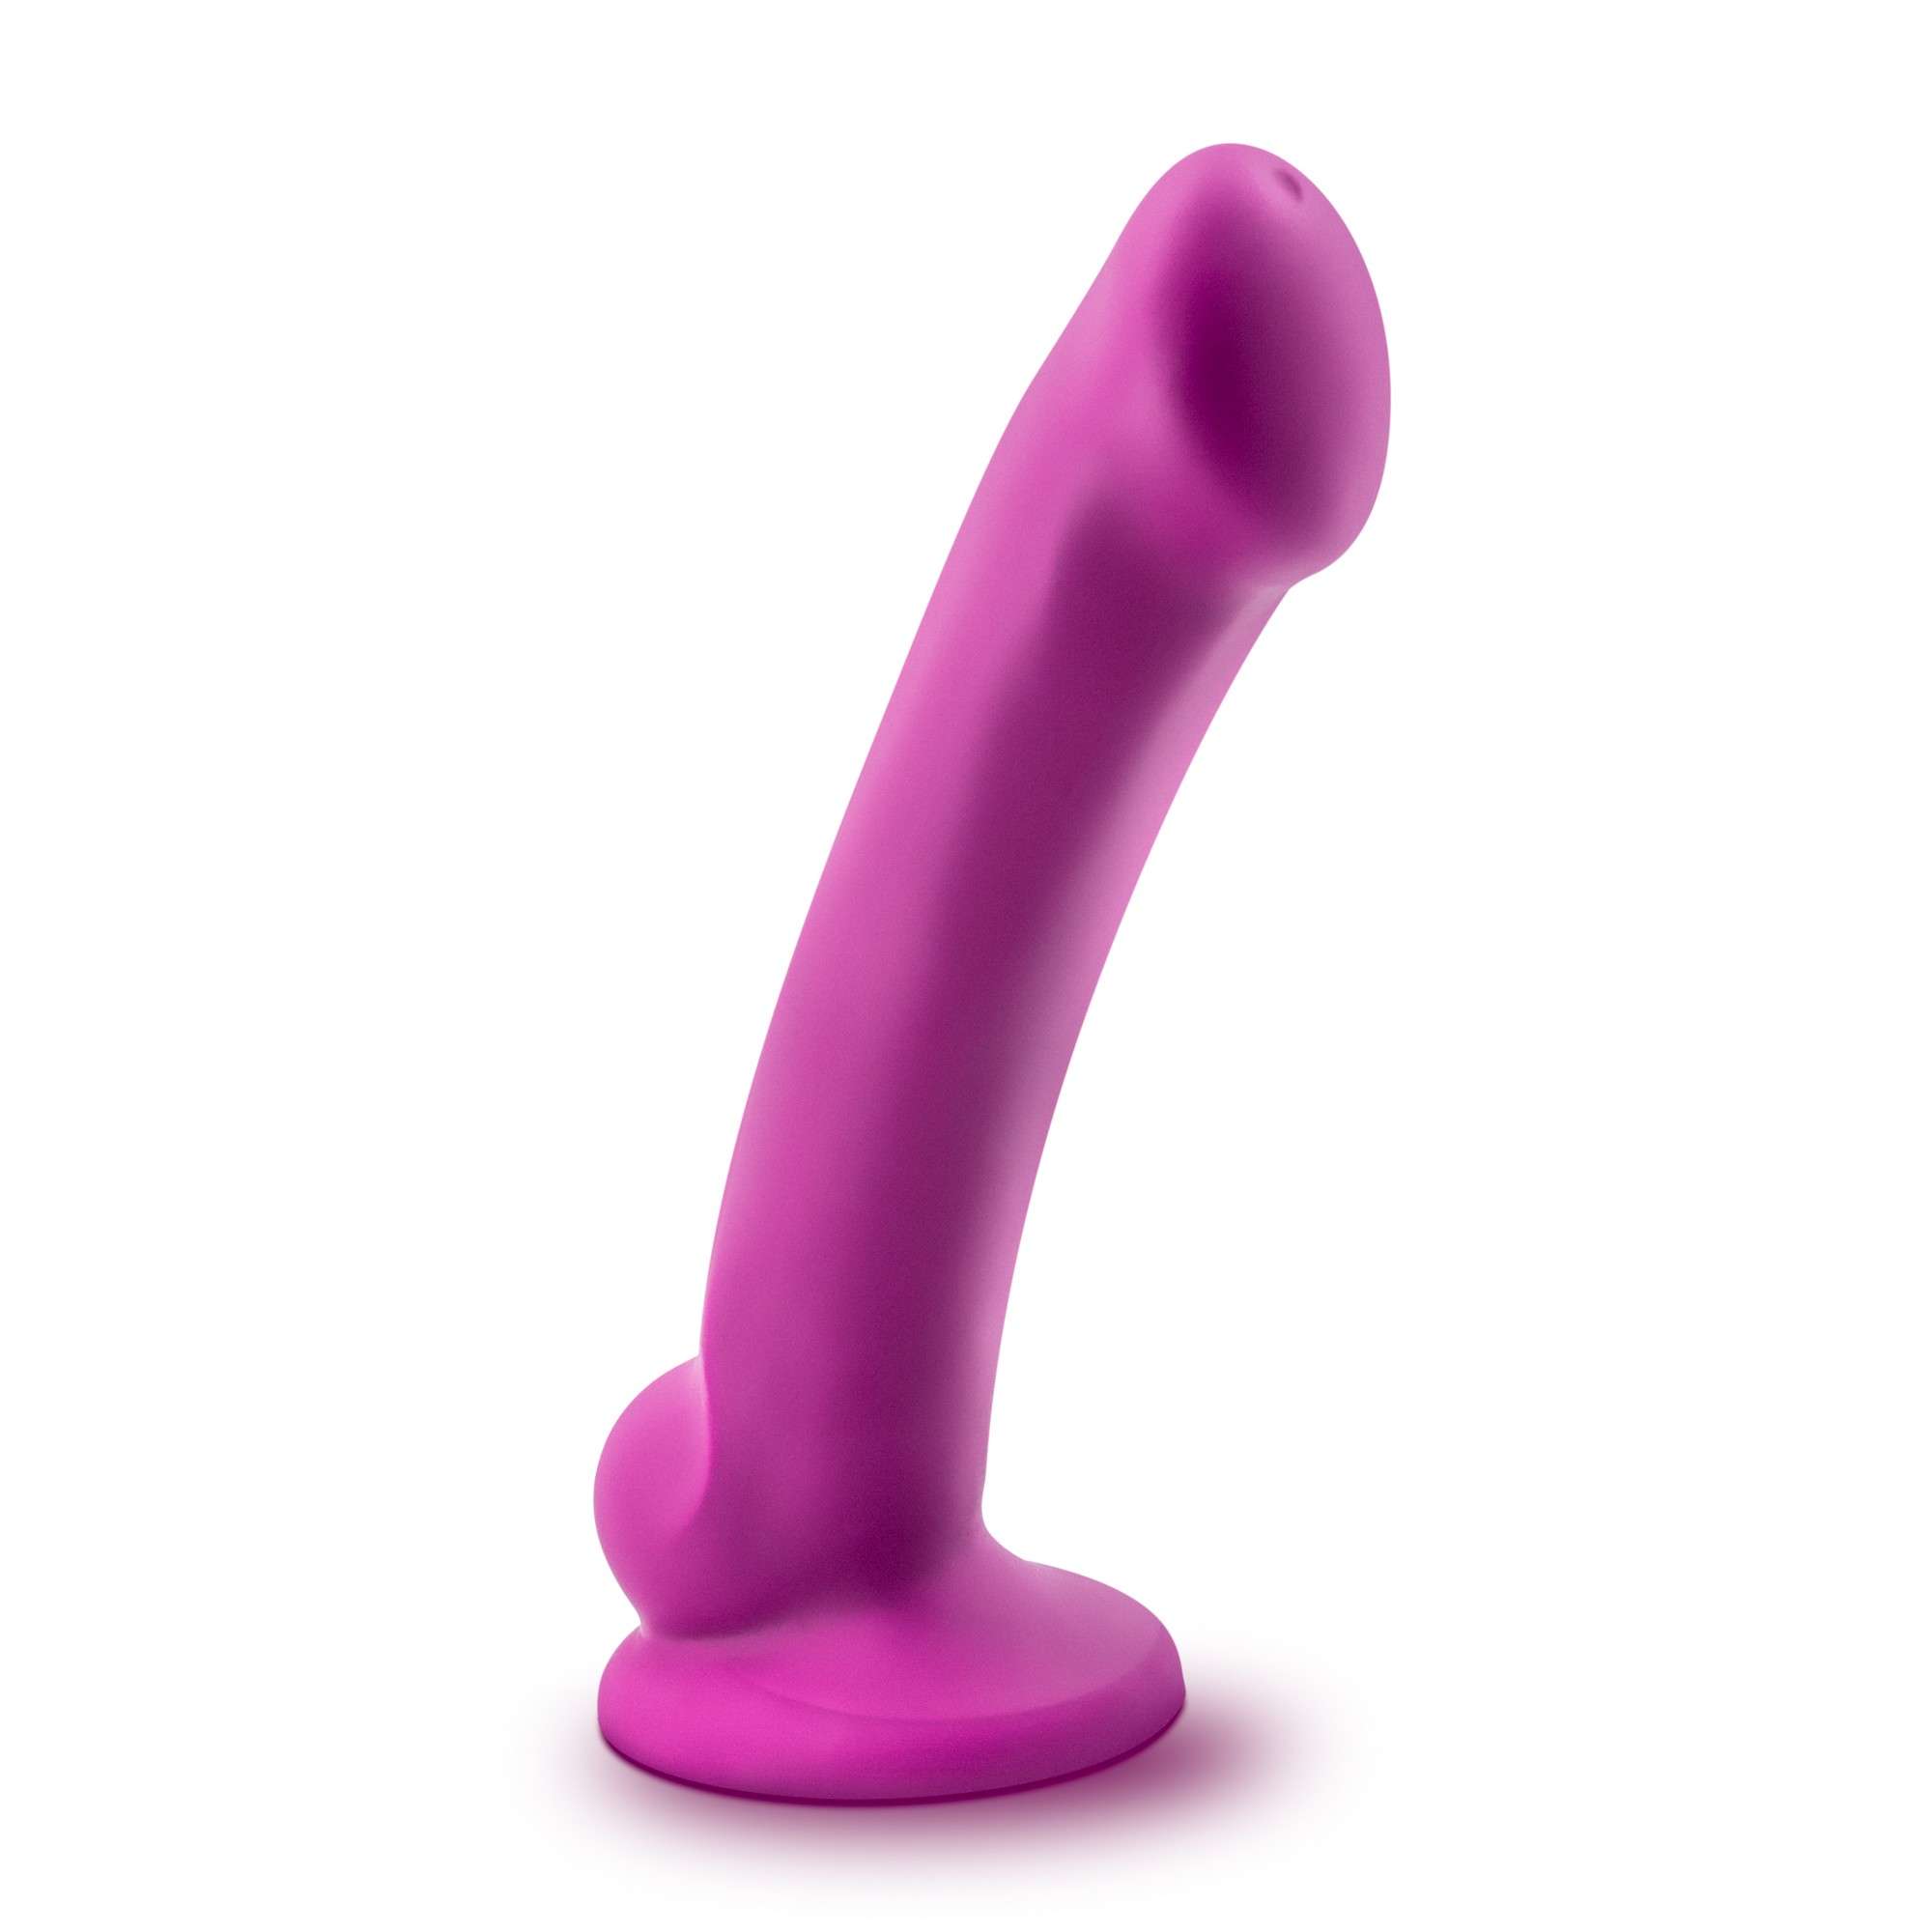 removing odor from silicone toys can be a challenge